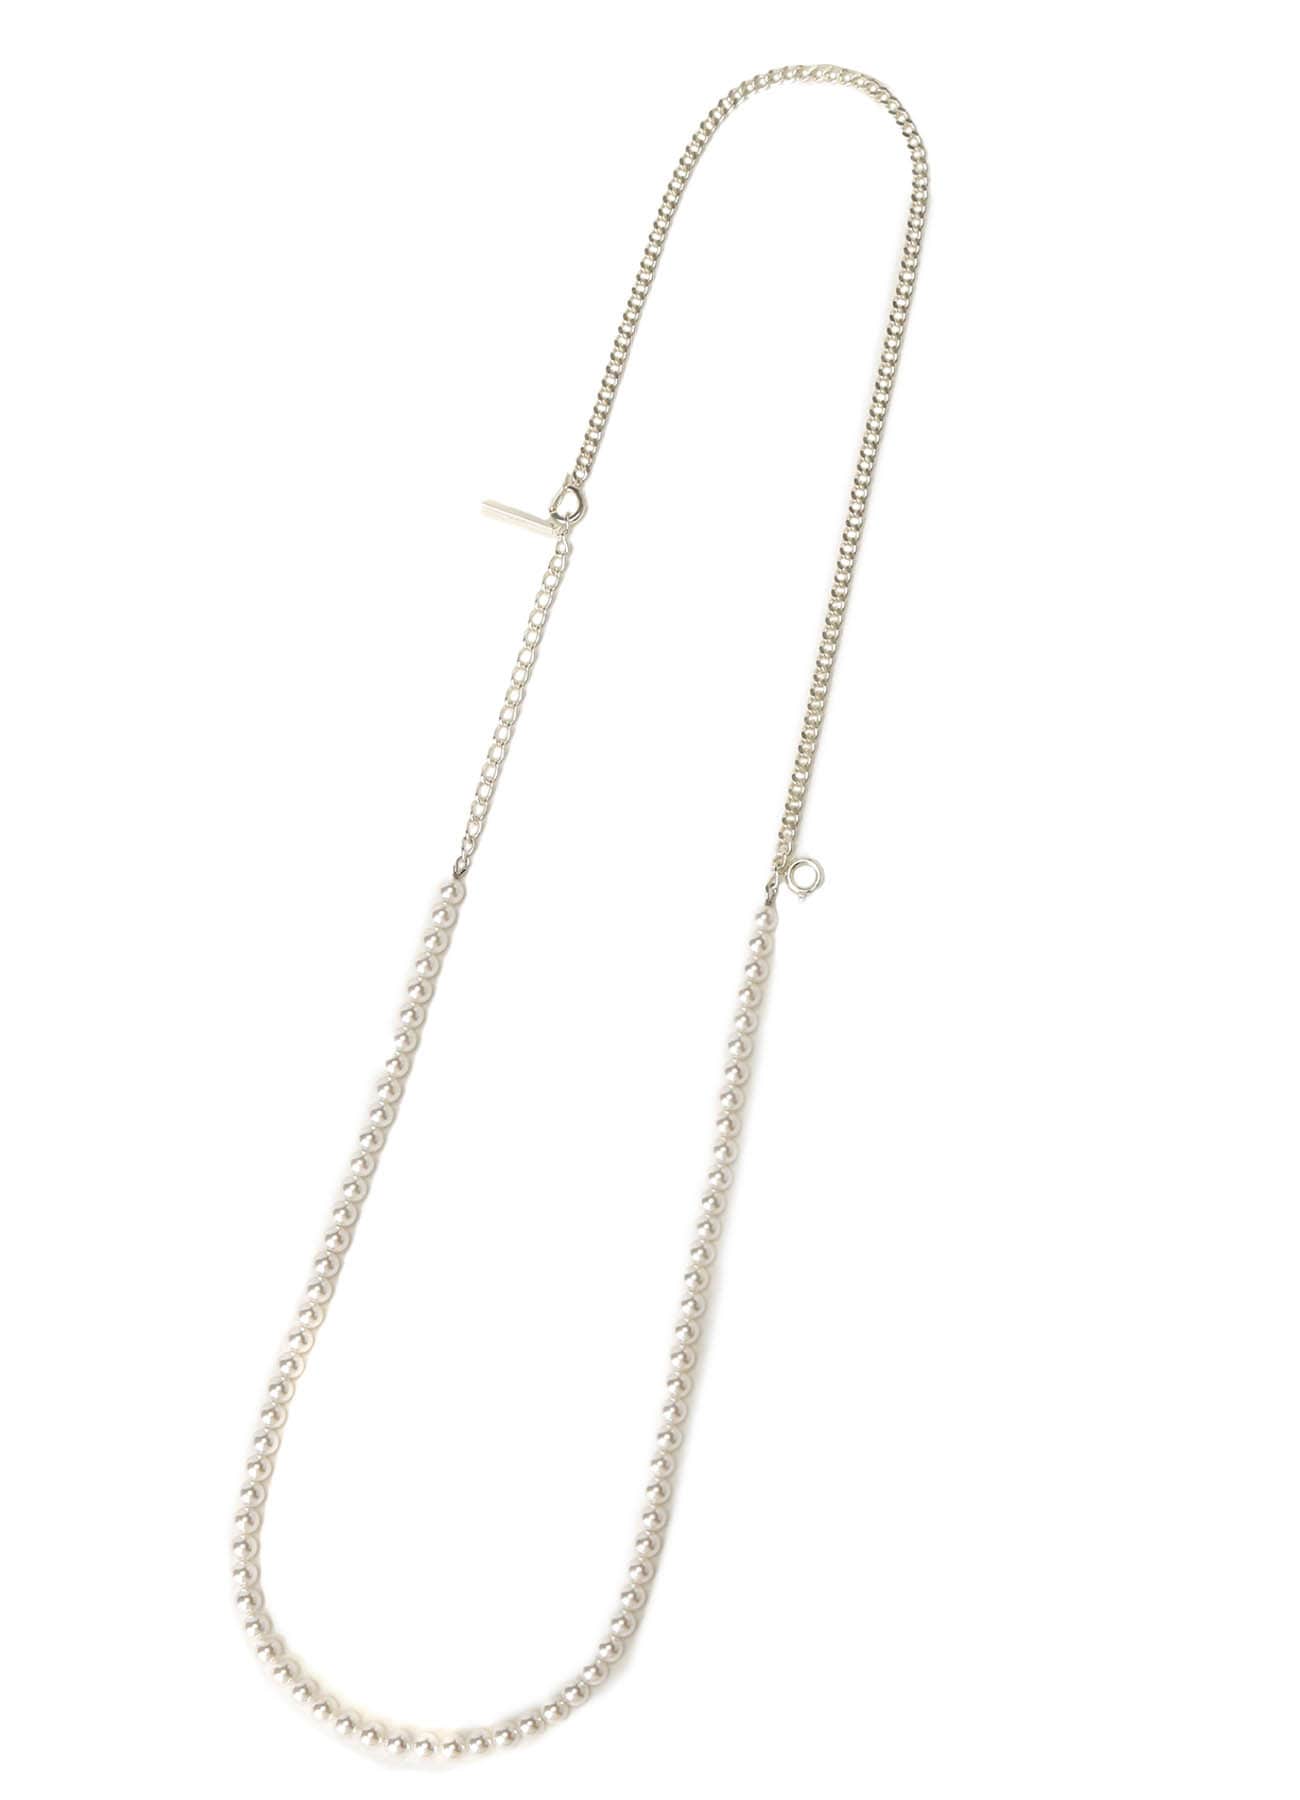 IMITATION PEARL ADJUSTABLE NECKLACE(FREE SIZE Silver): S'YTE｜THE 